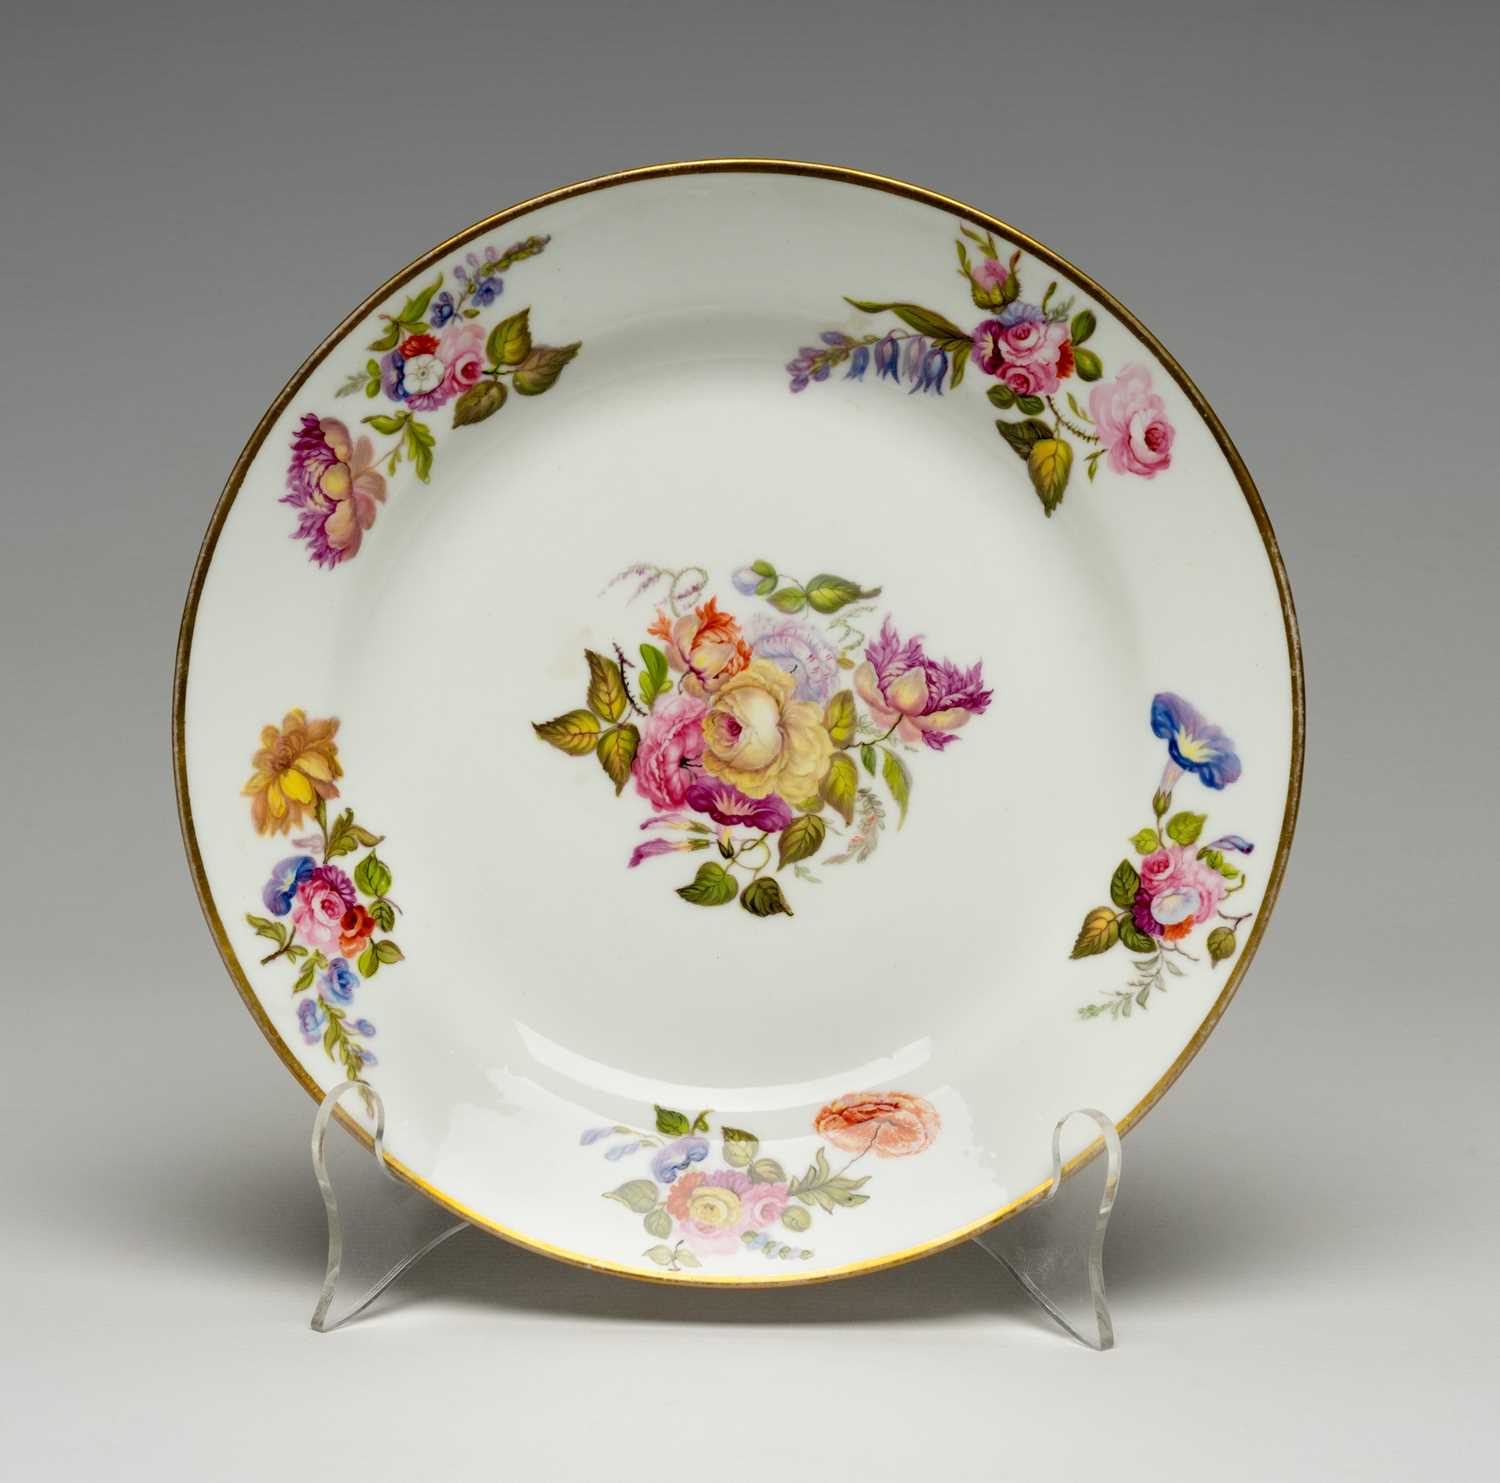 SWANSEA PORCELAIN PLATE circa 1815-17, painted by Henry Morris with tight sprays of summer flowers